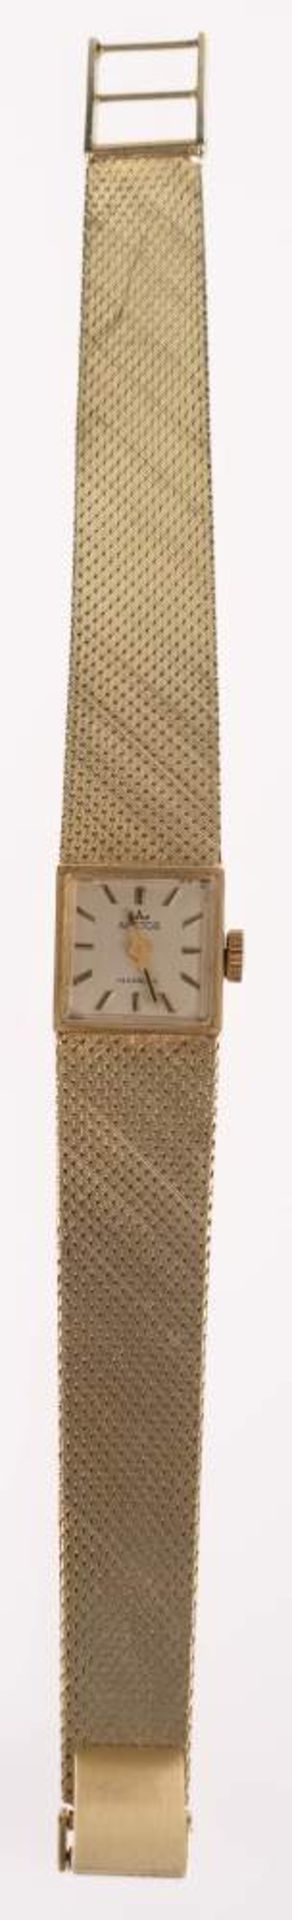 Arctos womens watch. Ca. 14 mm, 585er yellow gold, manual wind. Enameled dial with golden hands and - Image 2 of 4